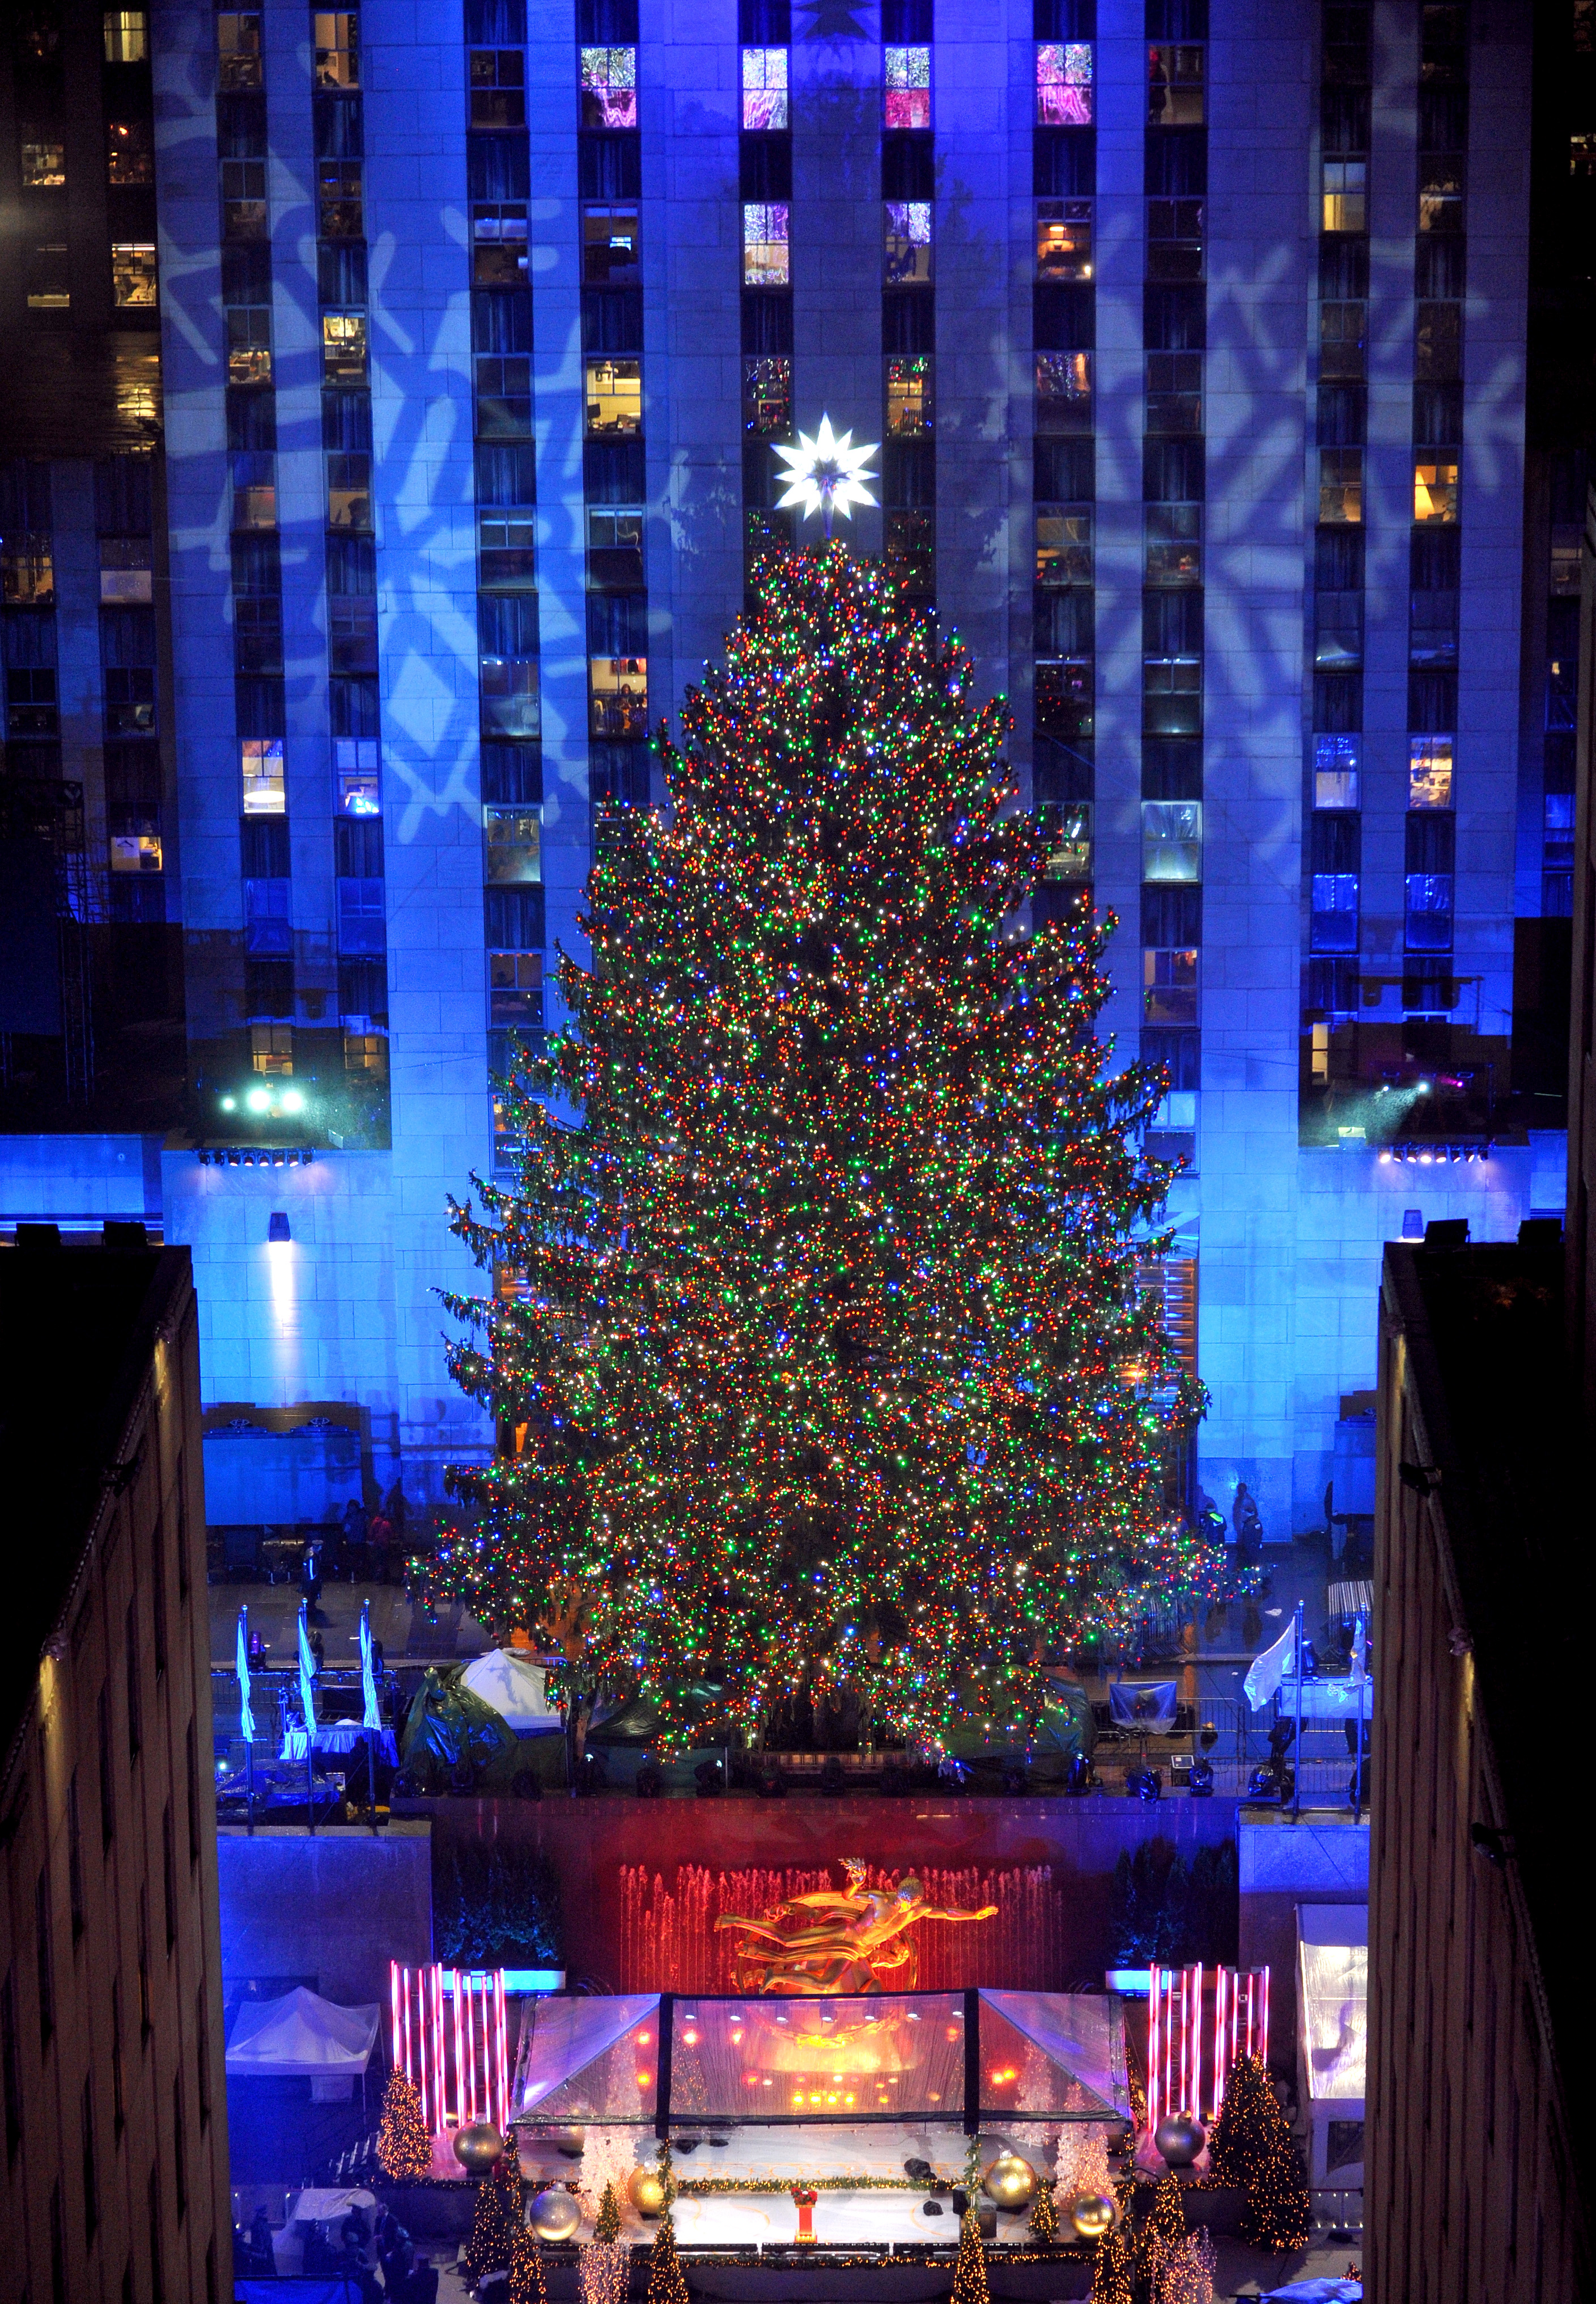 Rockefeller Center Christmas Tree takes on new life with Habitat for Humanity in new year ...